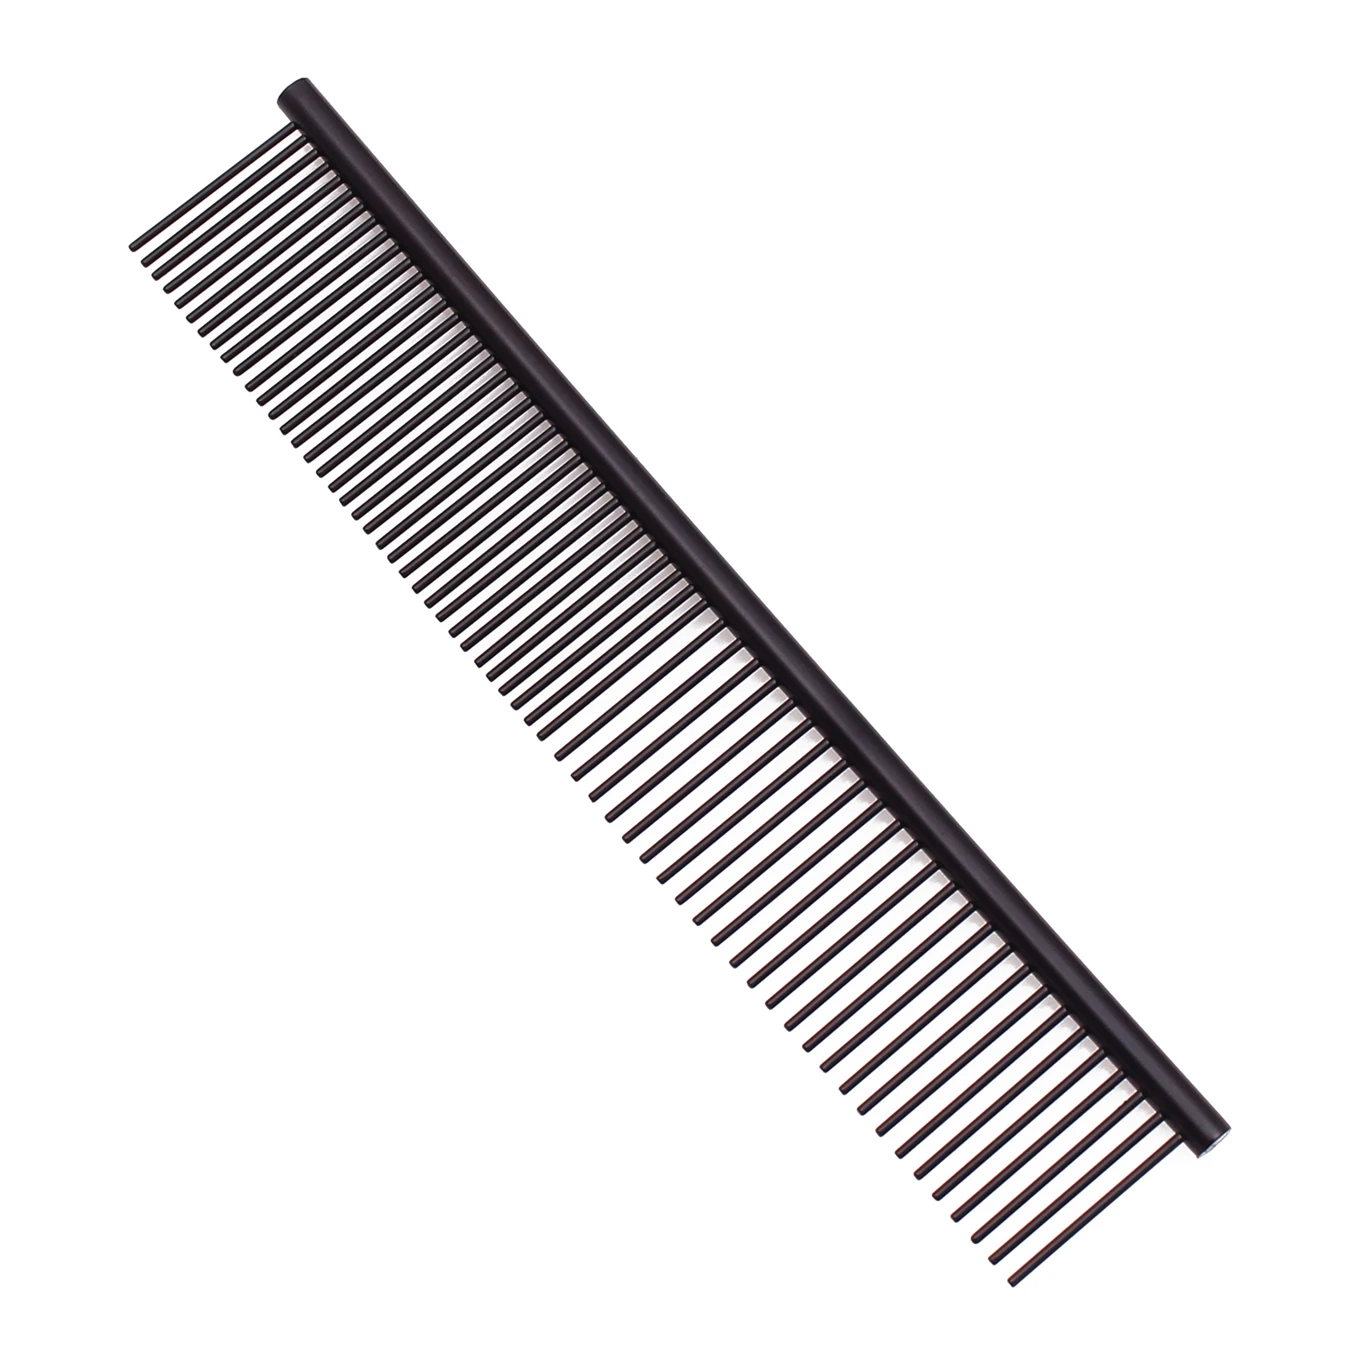 

Black Stainless Steel Pet Grooming Comb Row Teeth Needle Hair Trimmer Cat Dog Grooming Massage Comb Wide Tooth C6703, Customized color